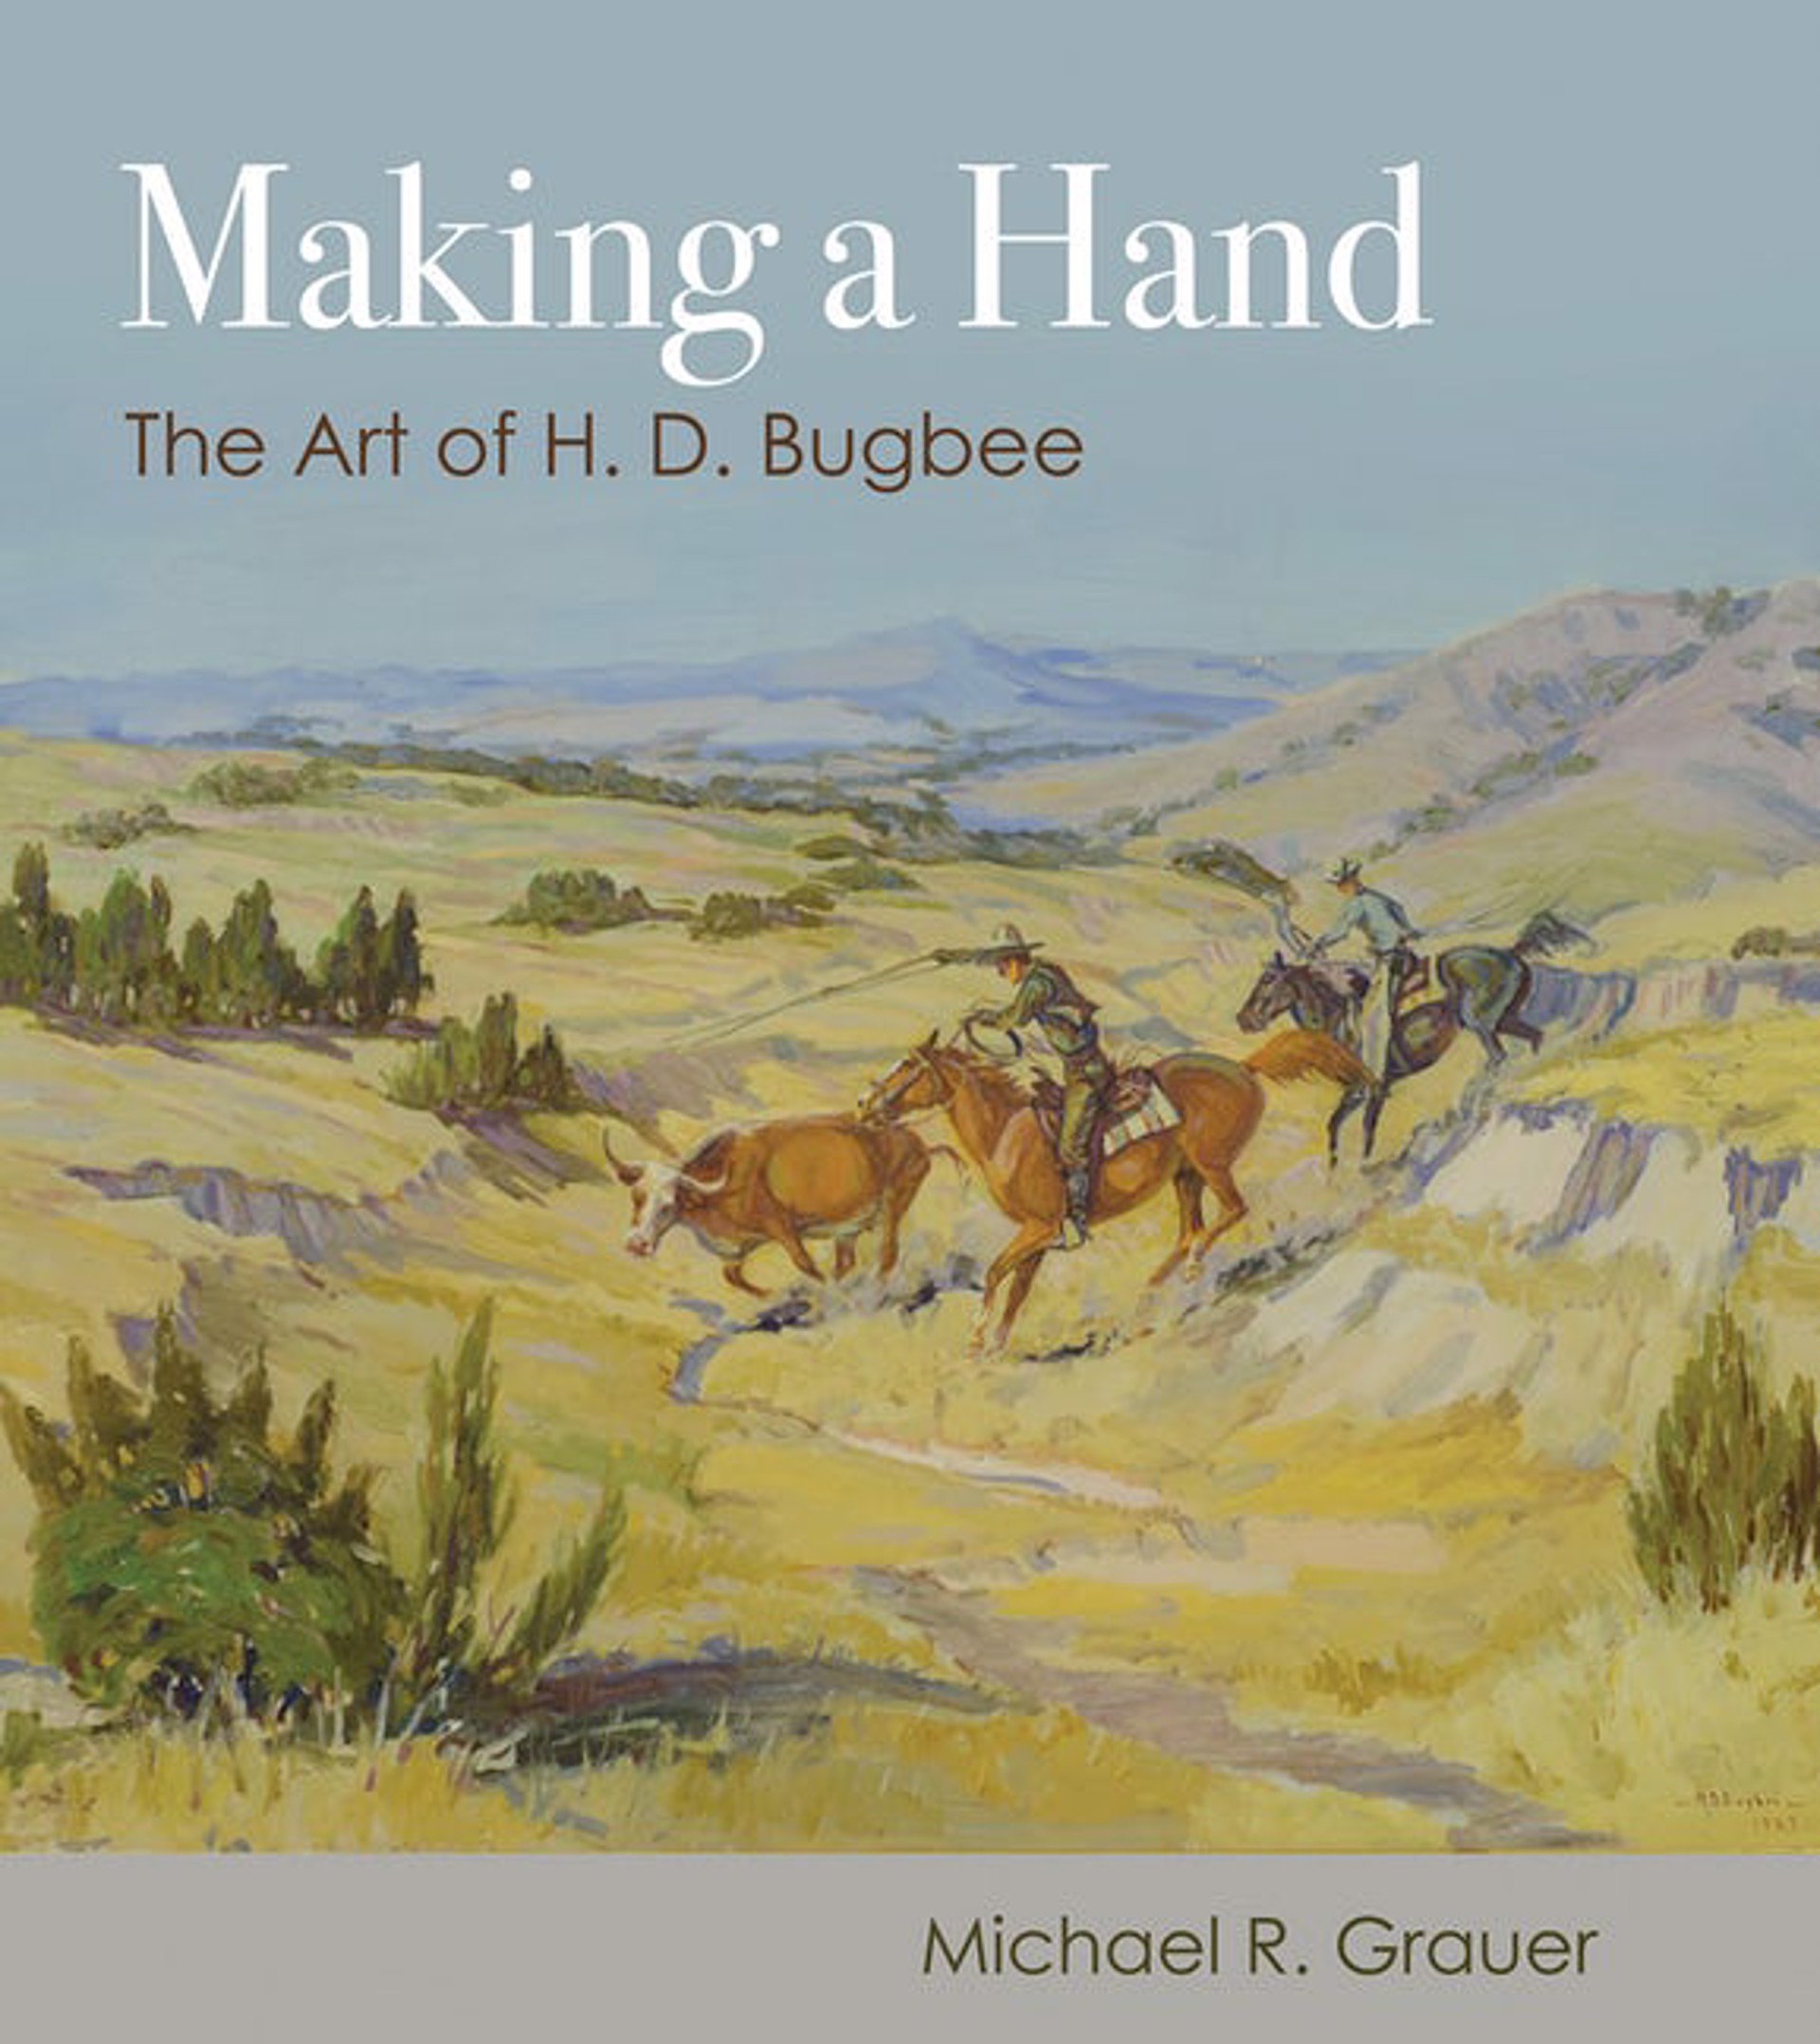 Making a Hand | The Art of H.D. Bugbee By Michael R. Grauer by Publications